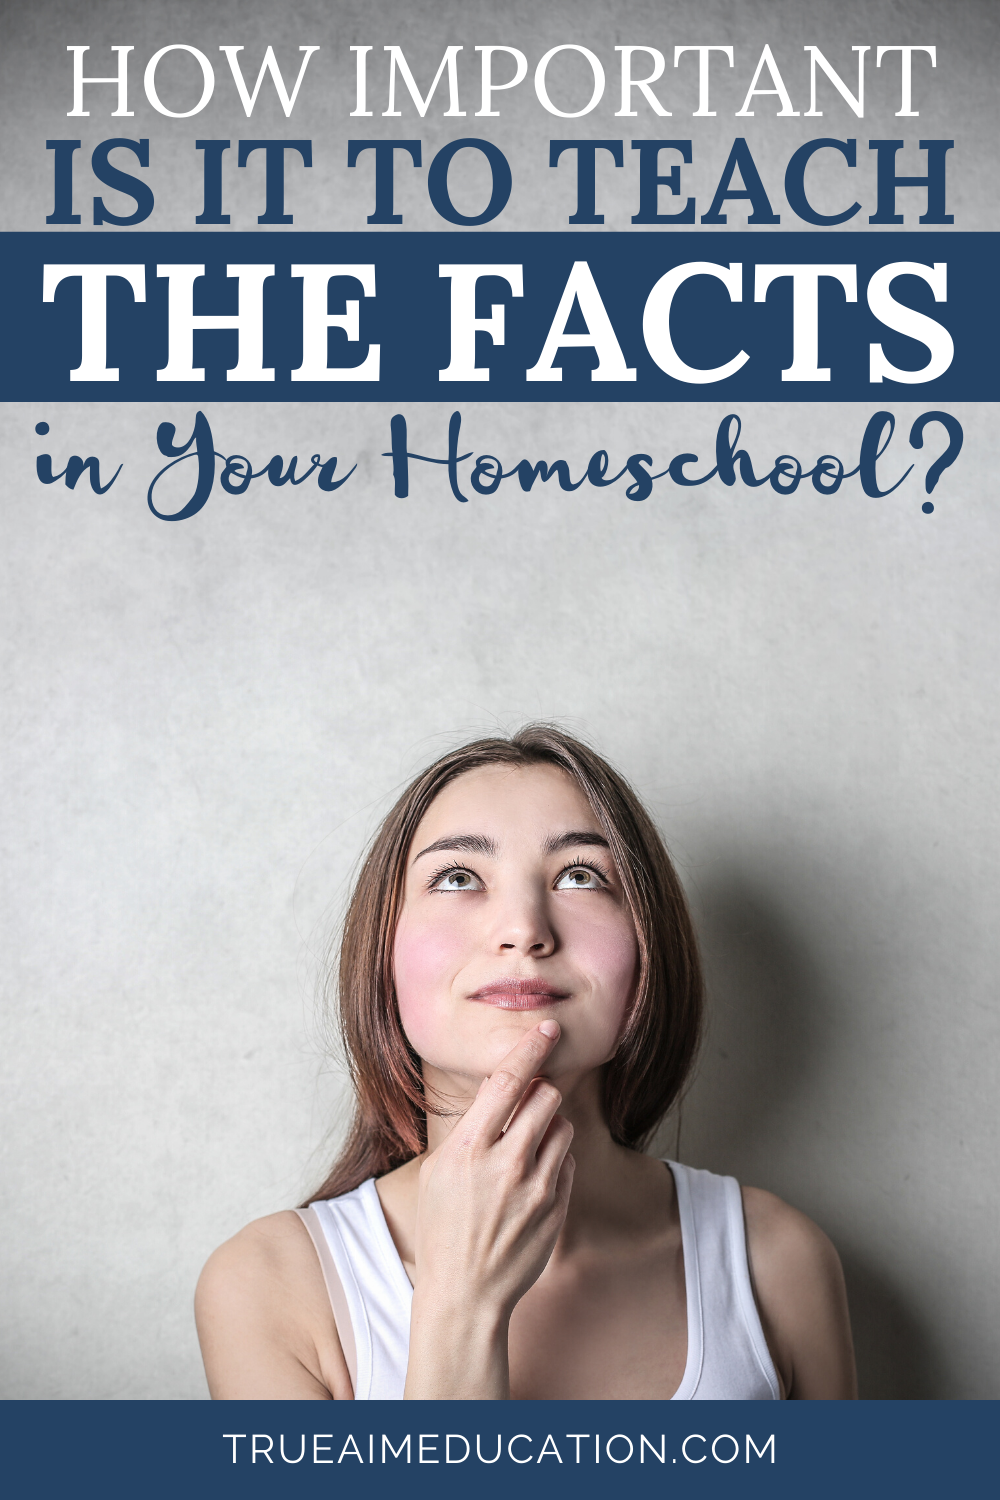 How Important Is It to Teach the Facts in Your Homeschool